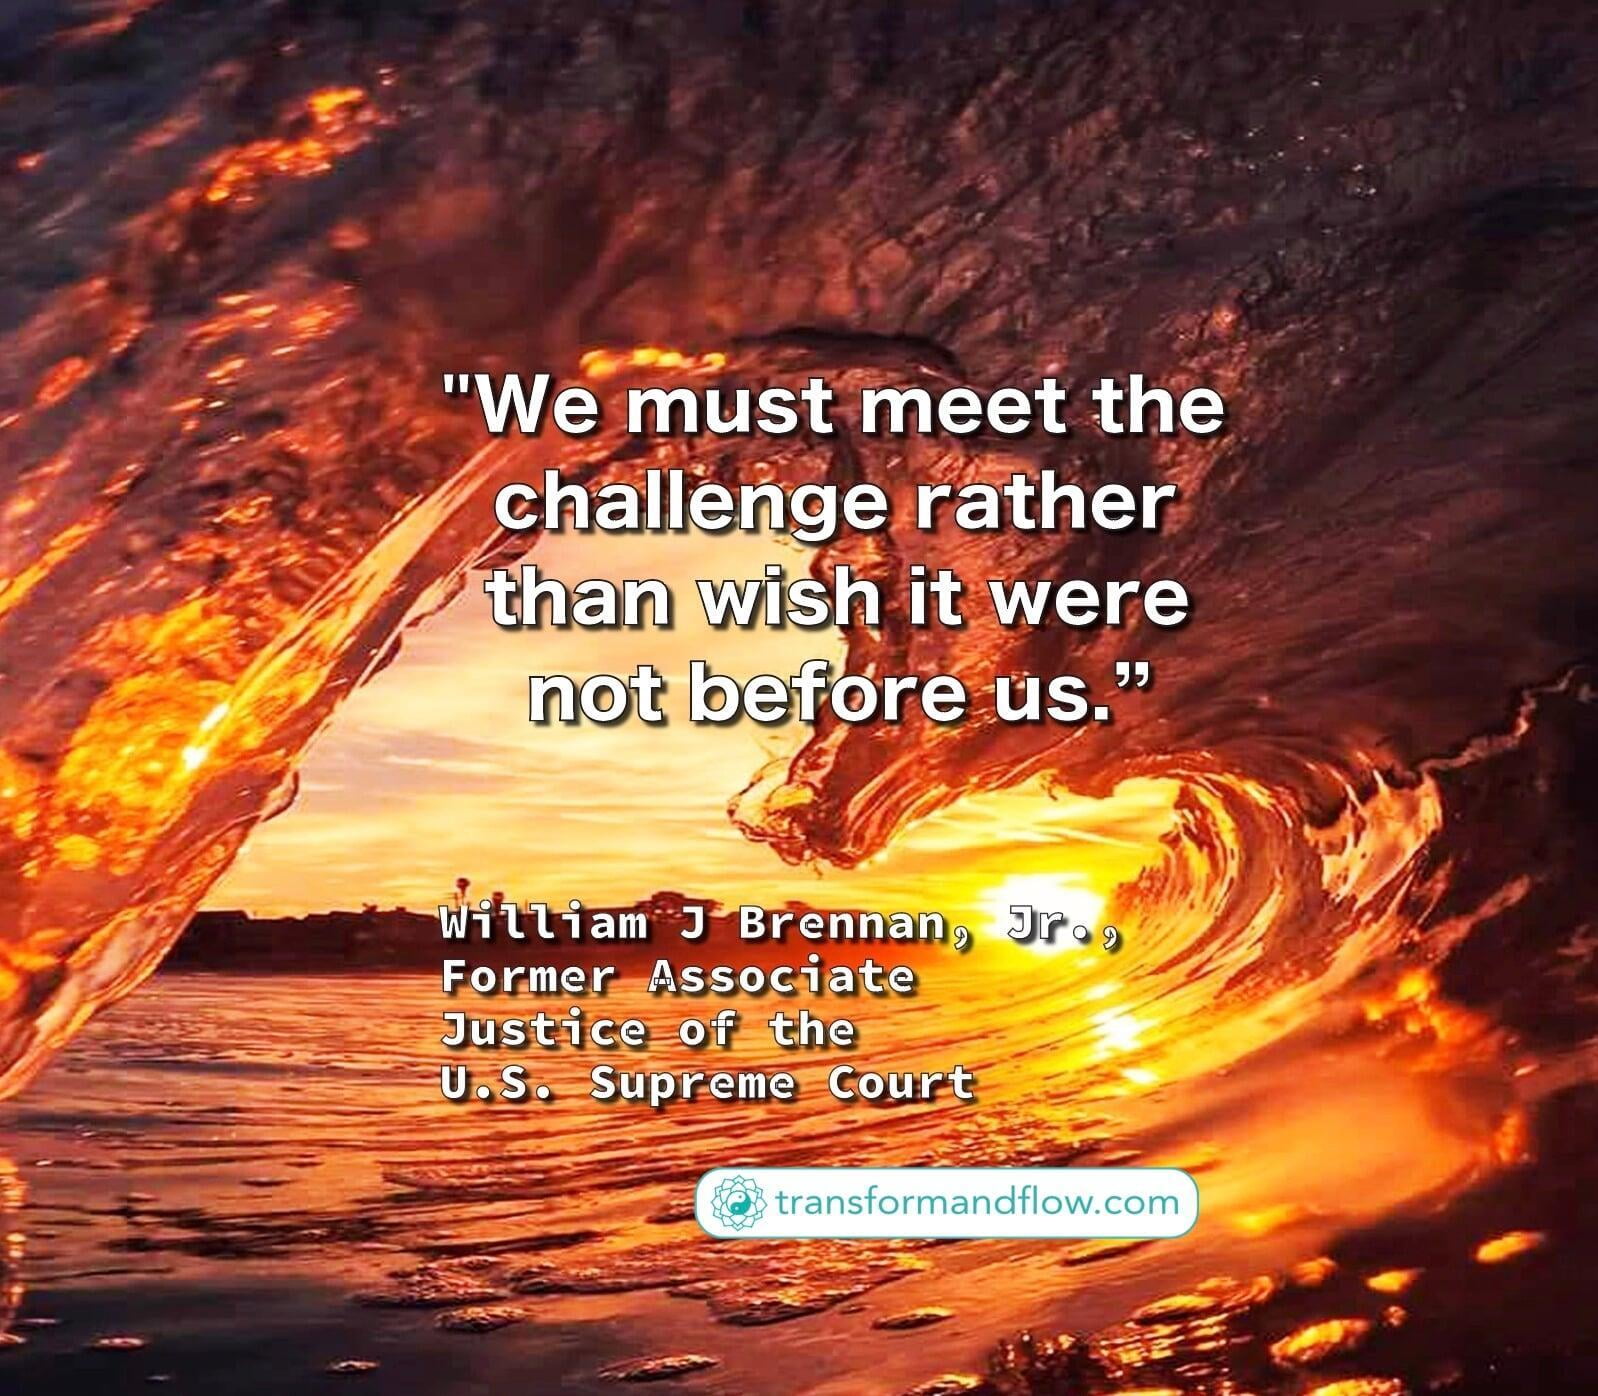 "We must meet the challenge rather than wish it were not before us." William J Brennan, Jr., Former Associate Justice of the U.S. Supreme Court